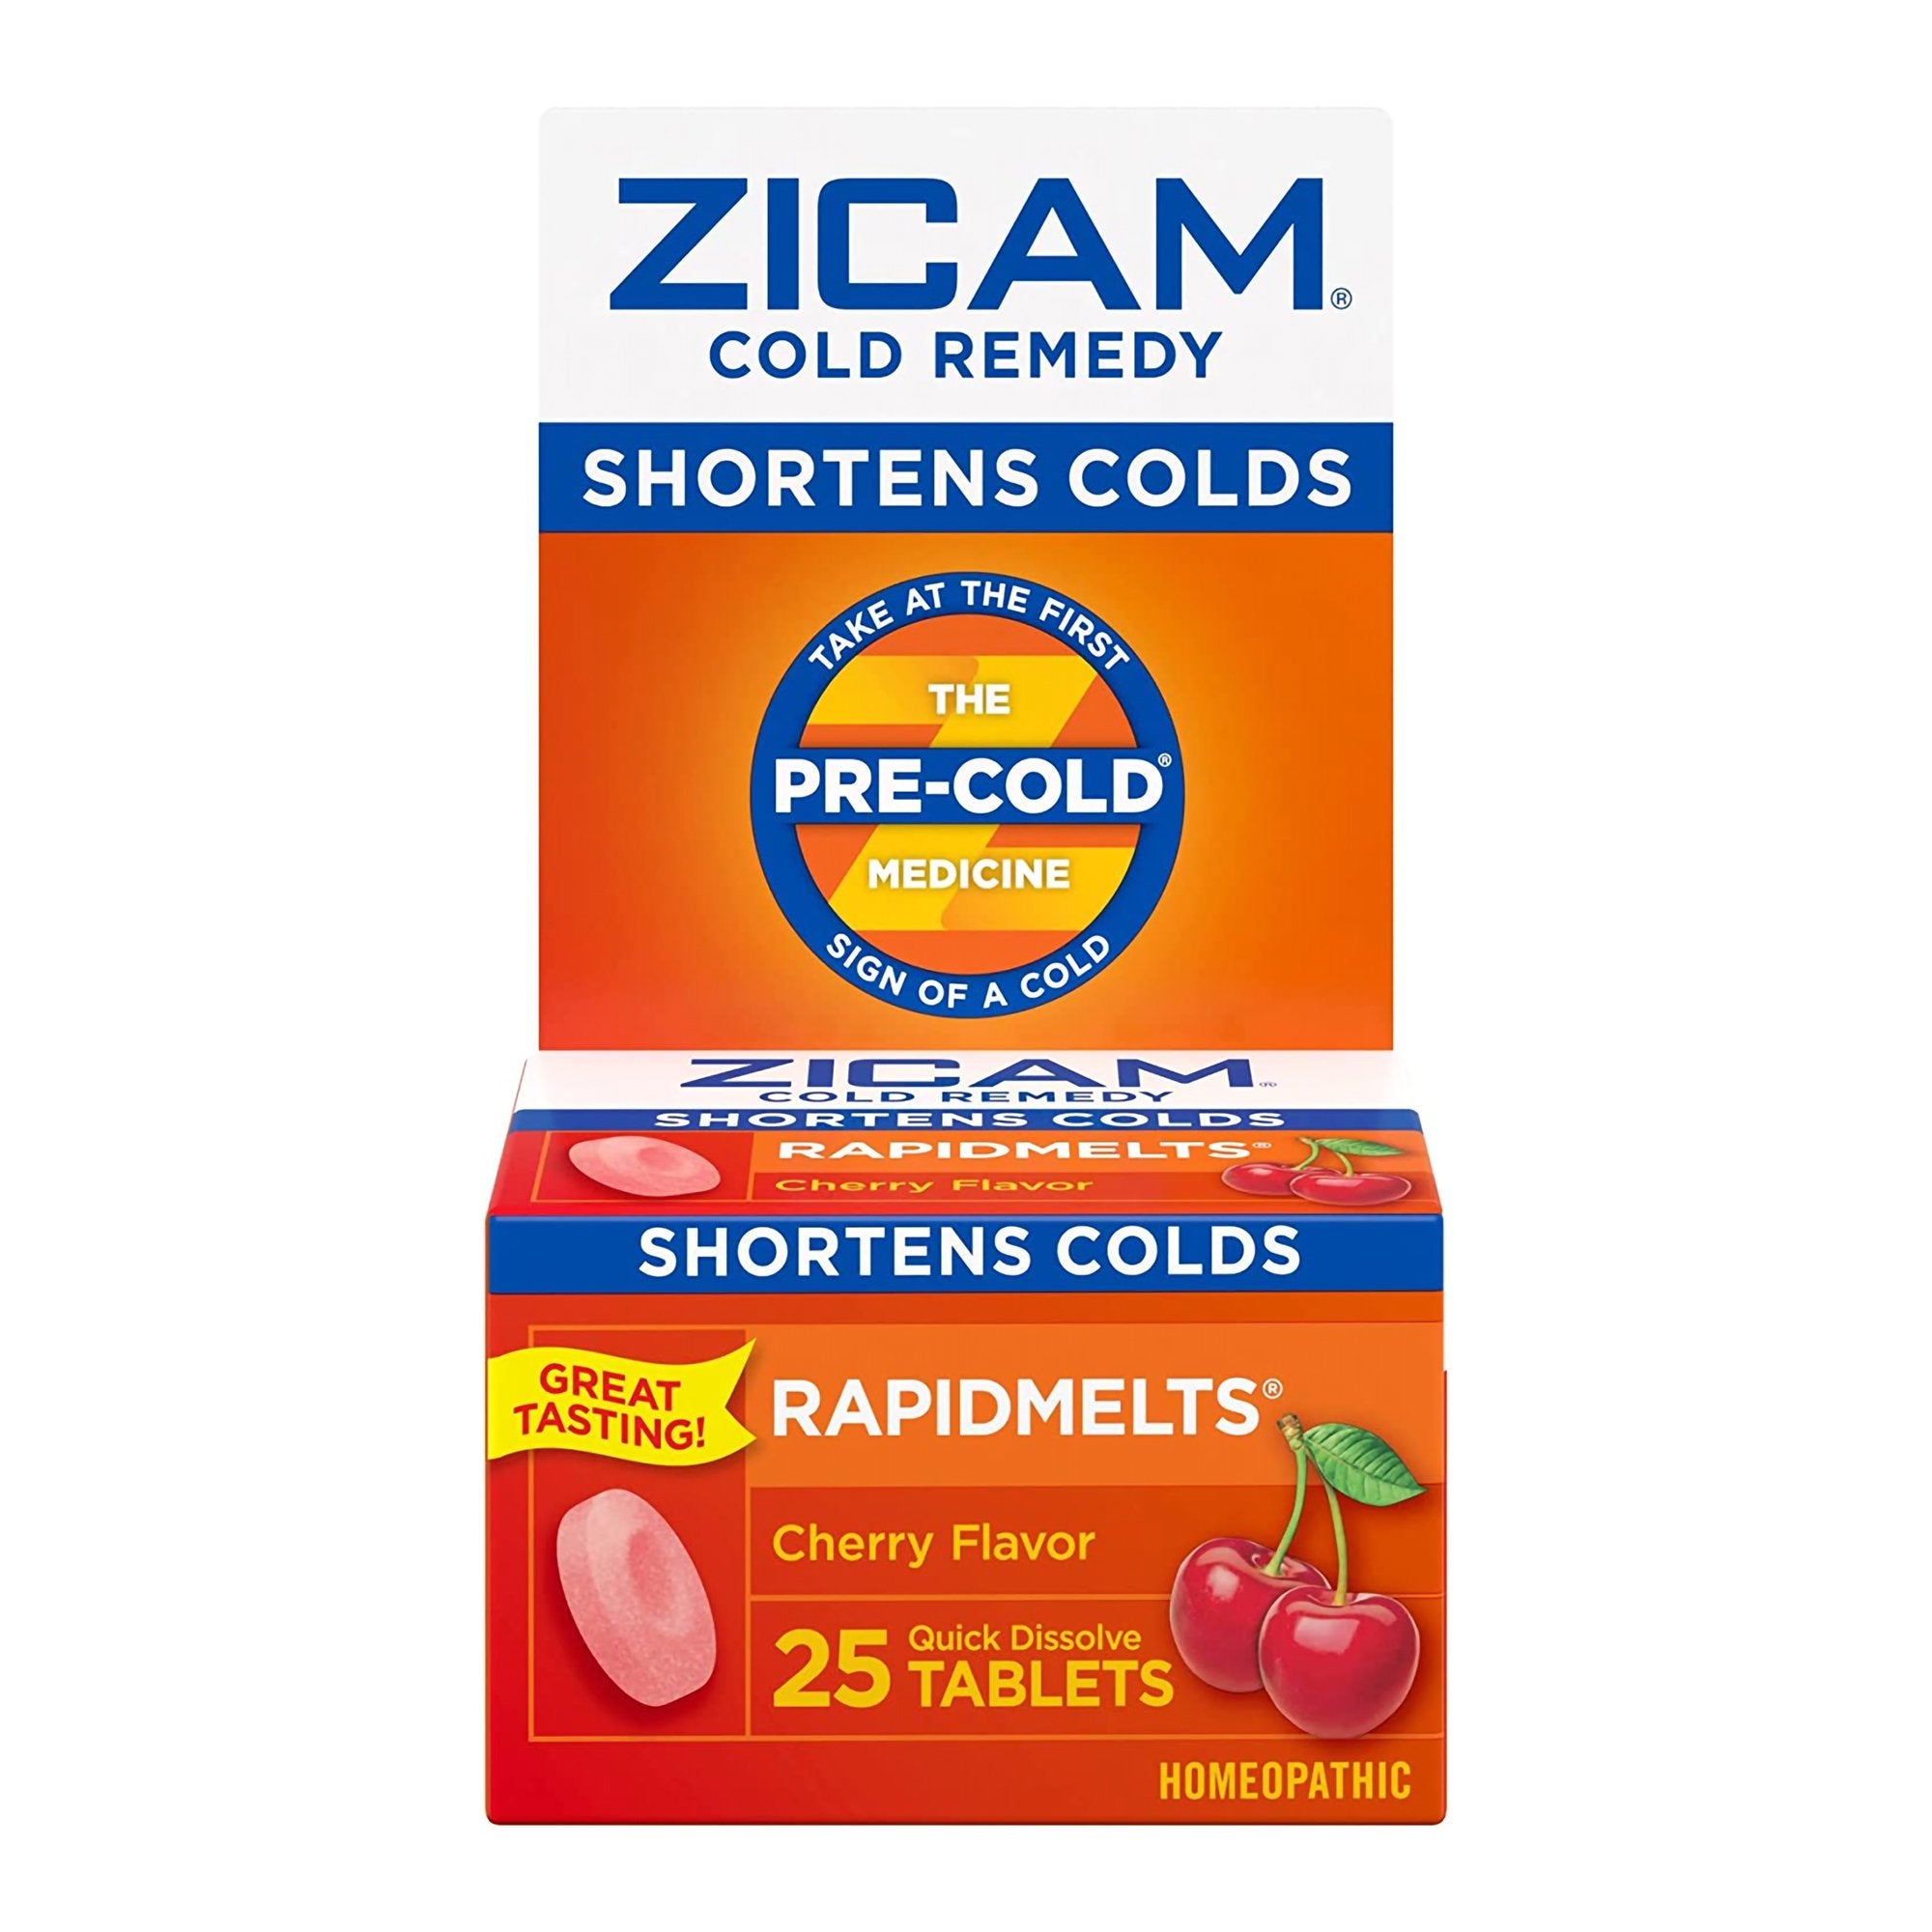 Cold and Cough Relief Zicam 2X - 1X Strength Tablet 25 per Box